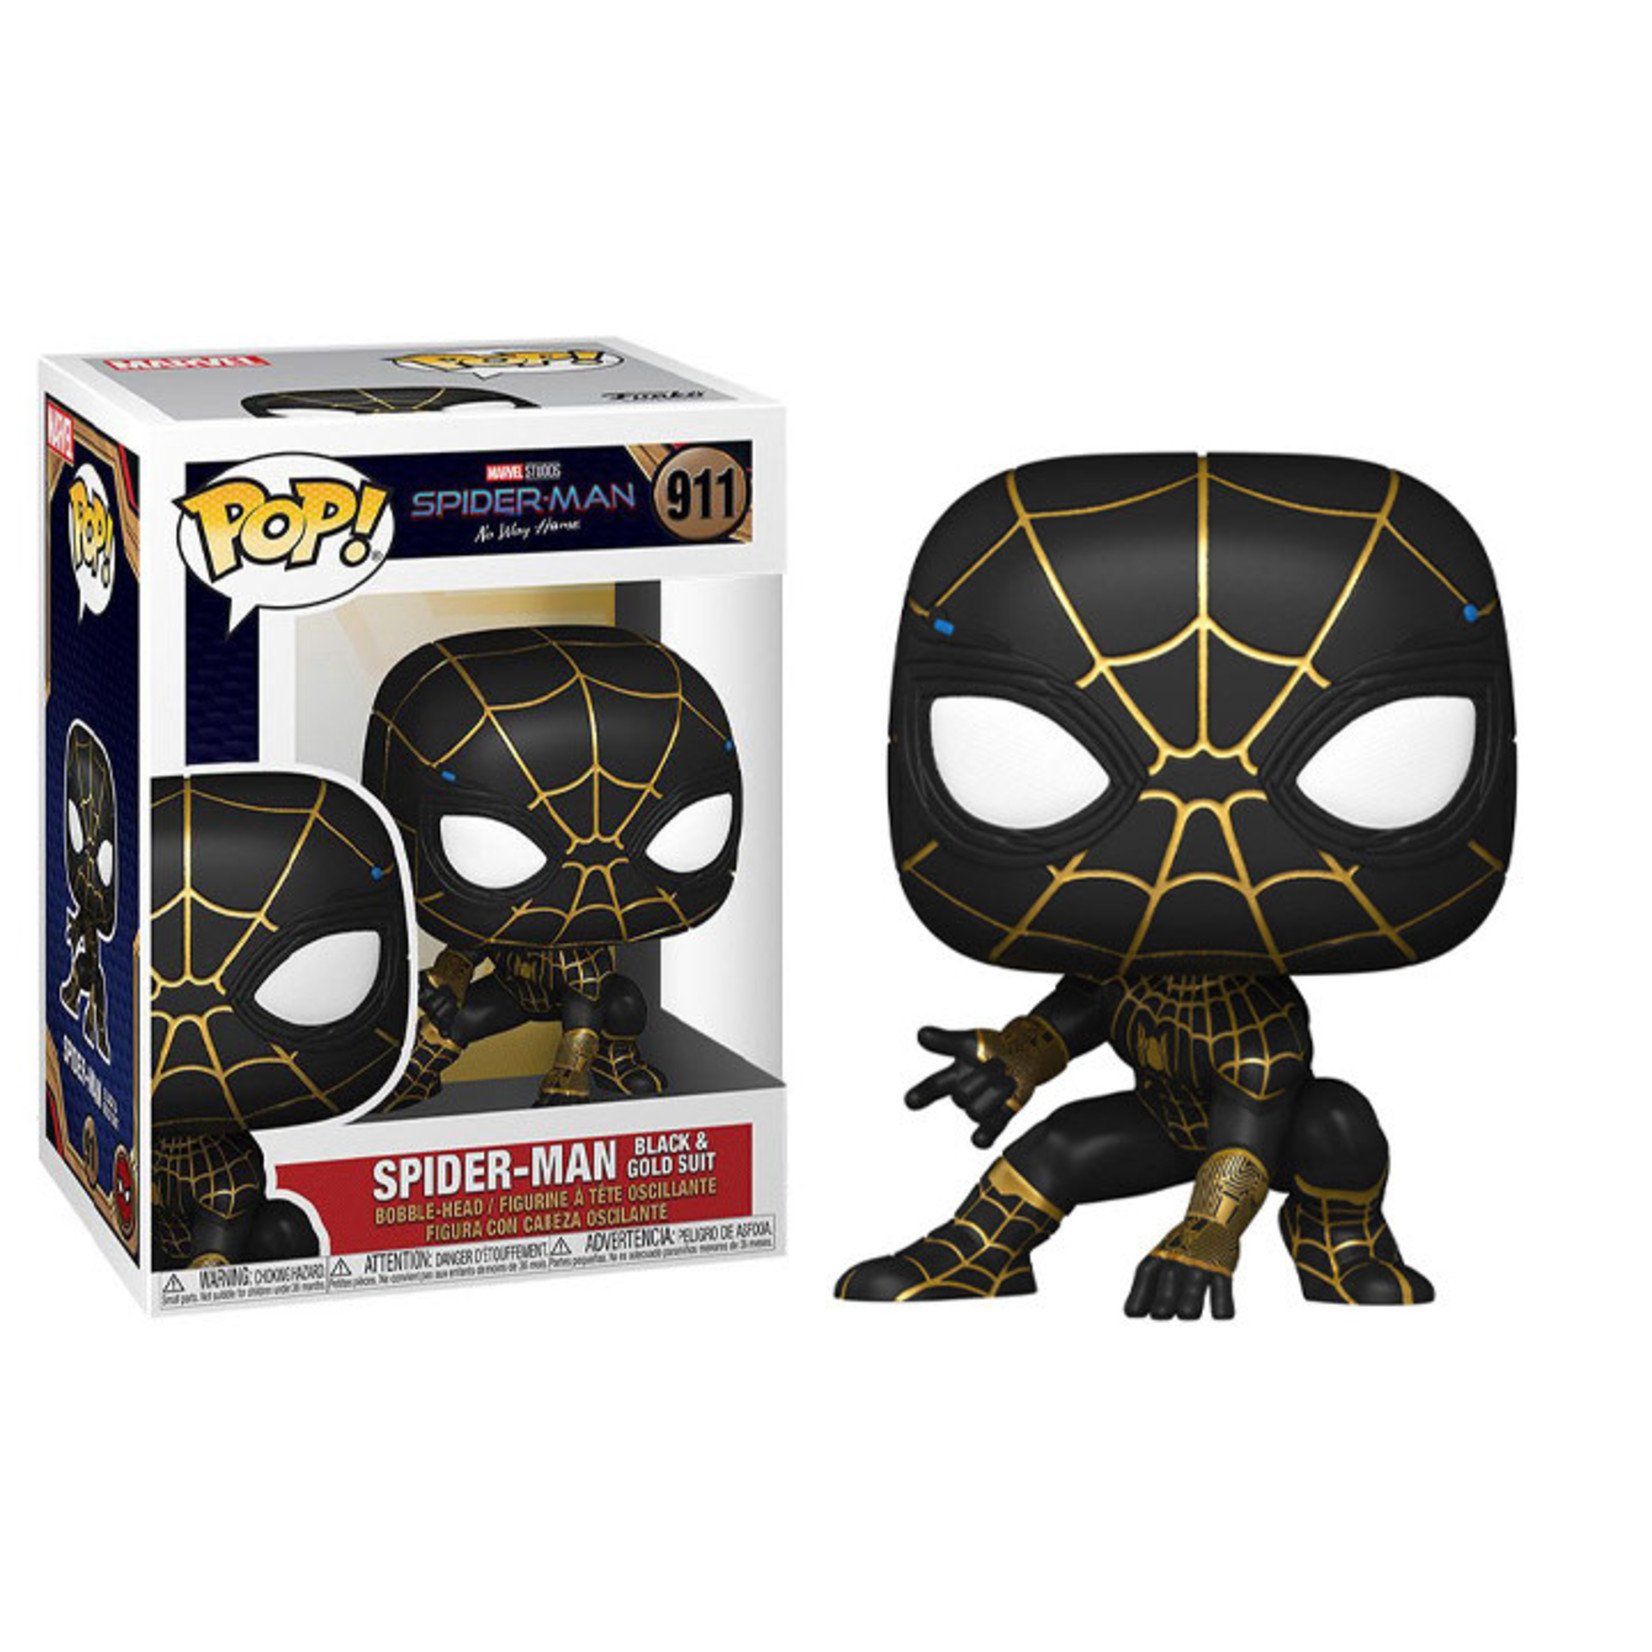 Funko Funko Pop! Marvel: Spider-Man: No Way Home - Spider-Man in Black and Gold Suit